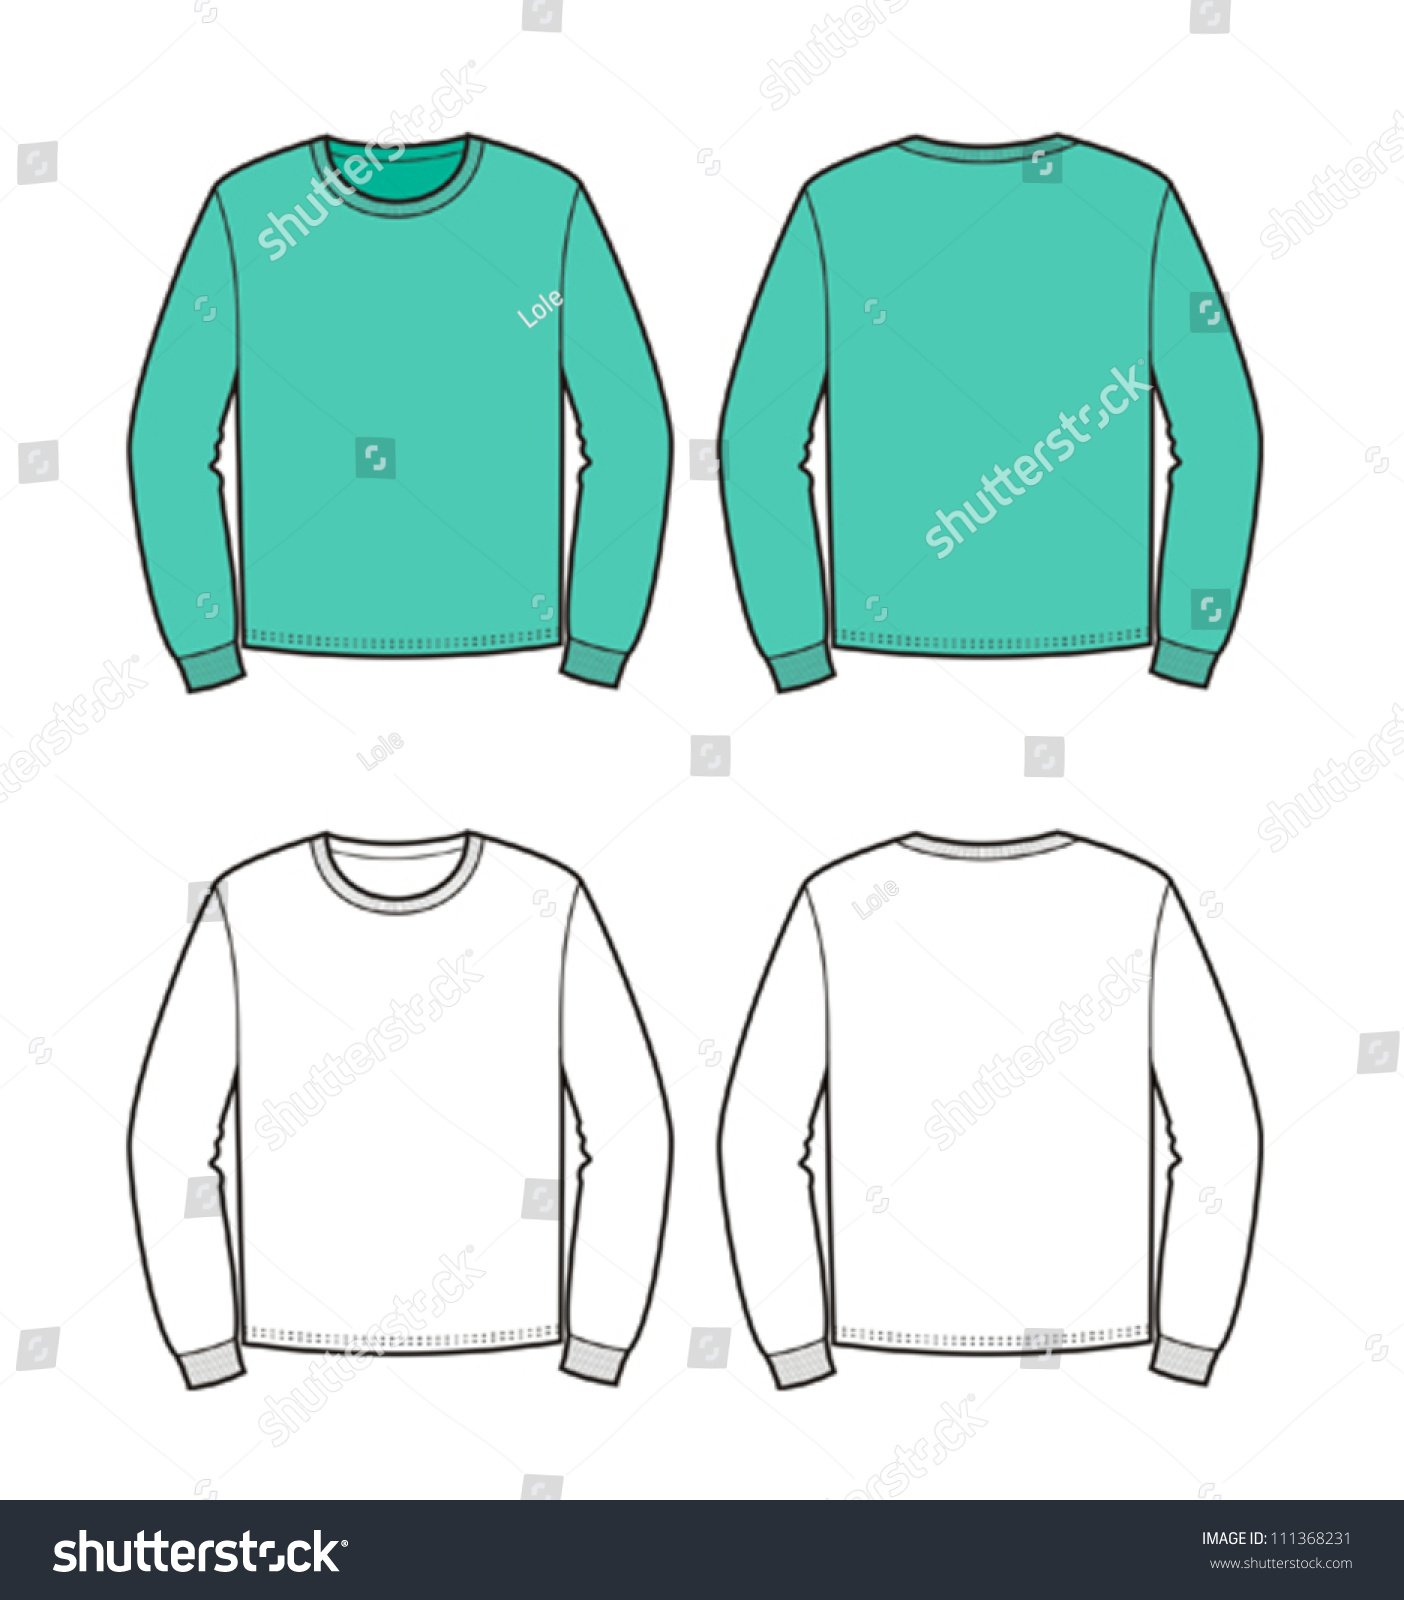 Vector Illustration Of Man'S Jersey. Front And Back Views. Knitwear ...